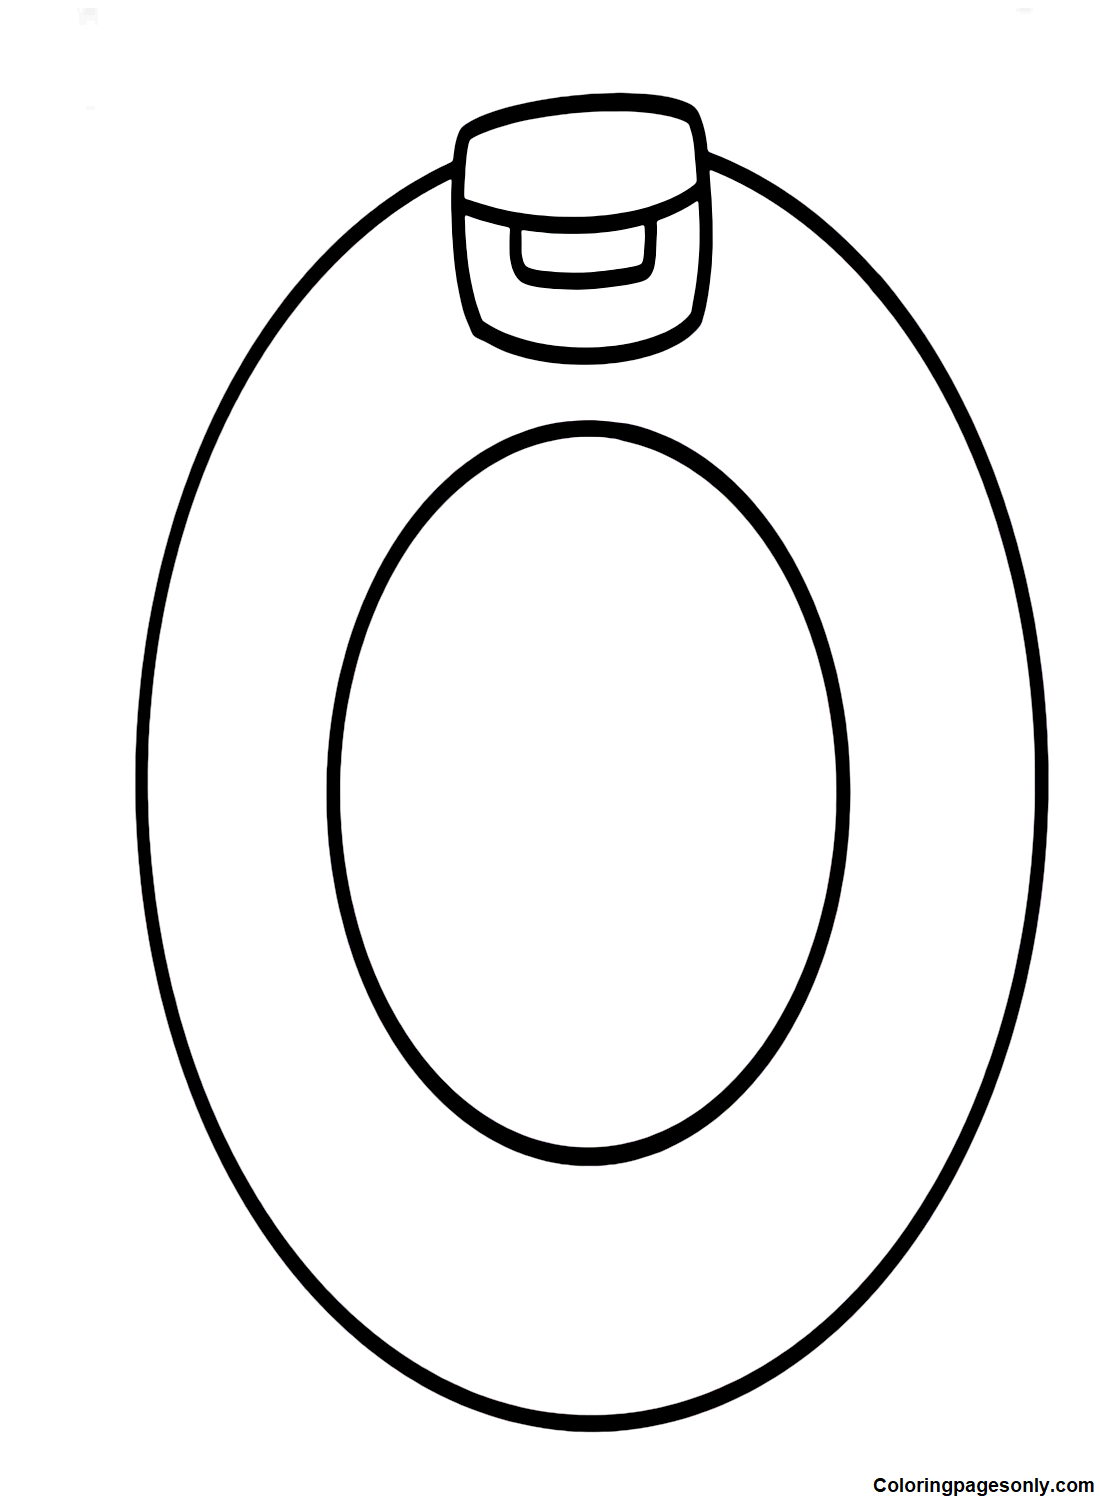 Lettle O From Alphabet Lore Coloring Pages